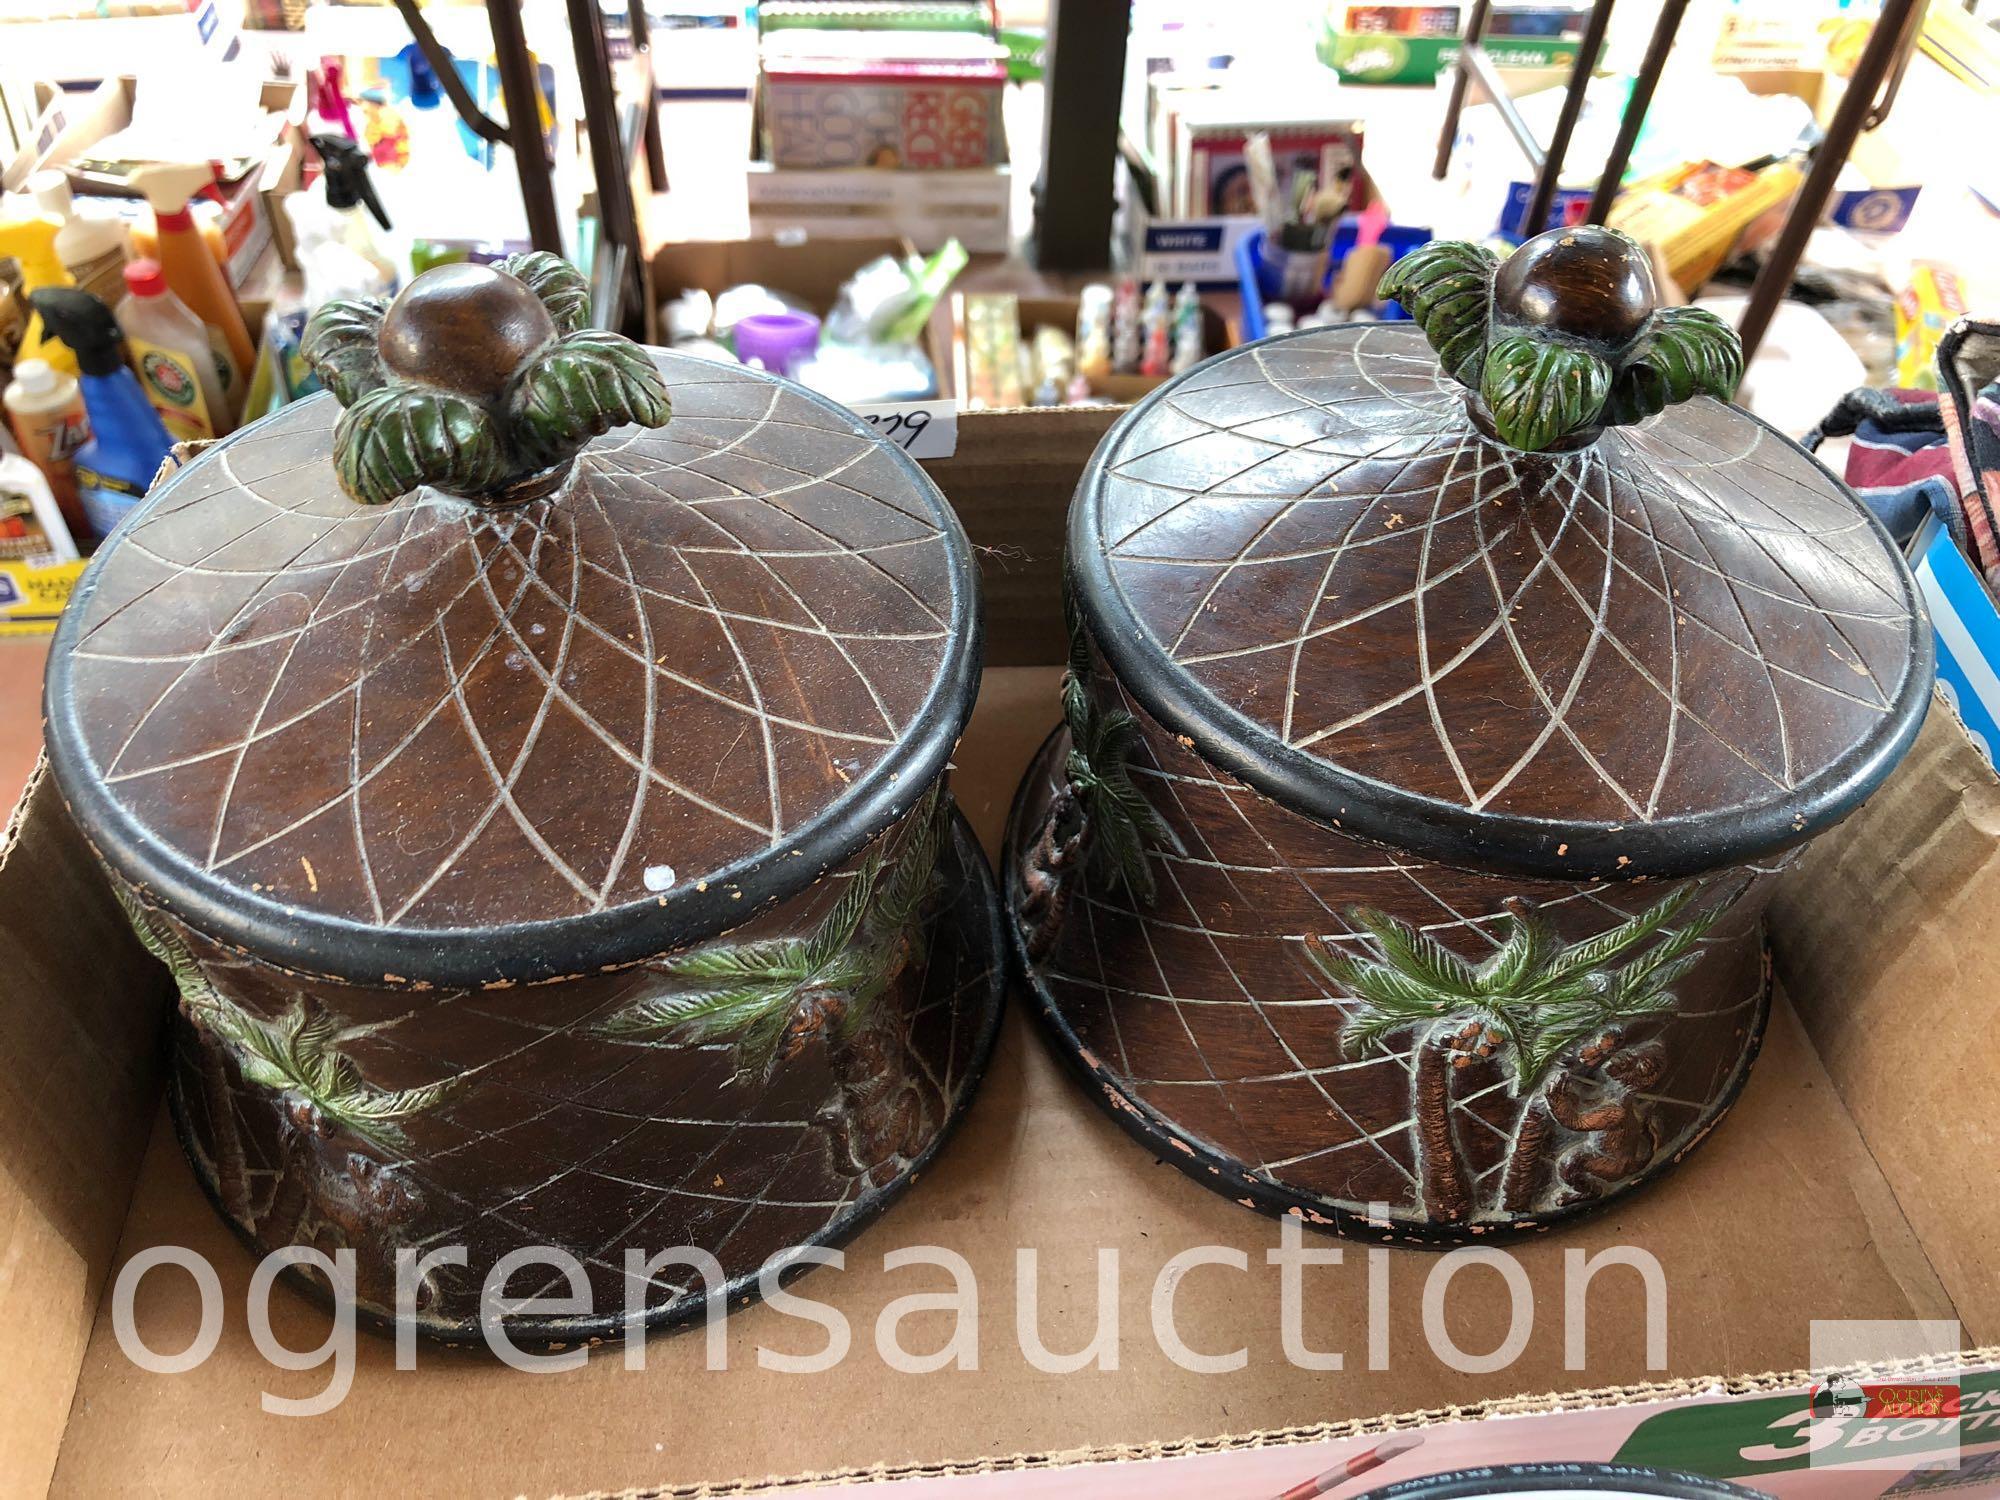 Decor - 2 lg. counter containers w/ lids, palm tree motif (1 chipped under lid), 7'hx6.5"w